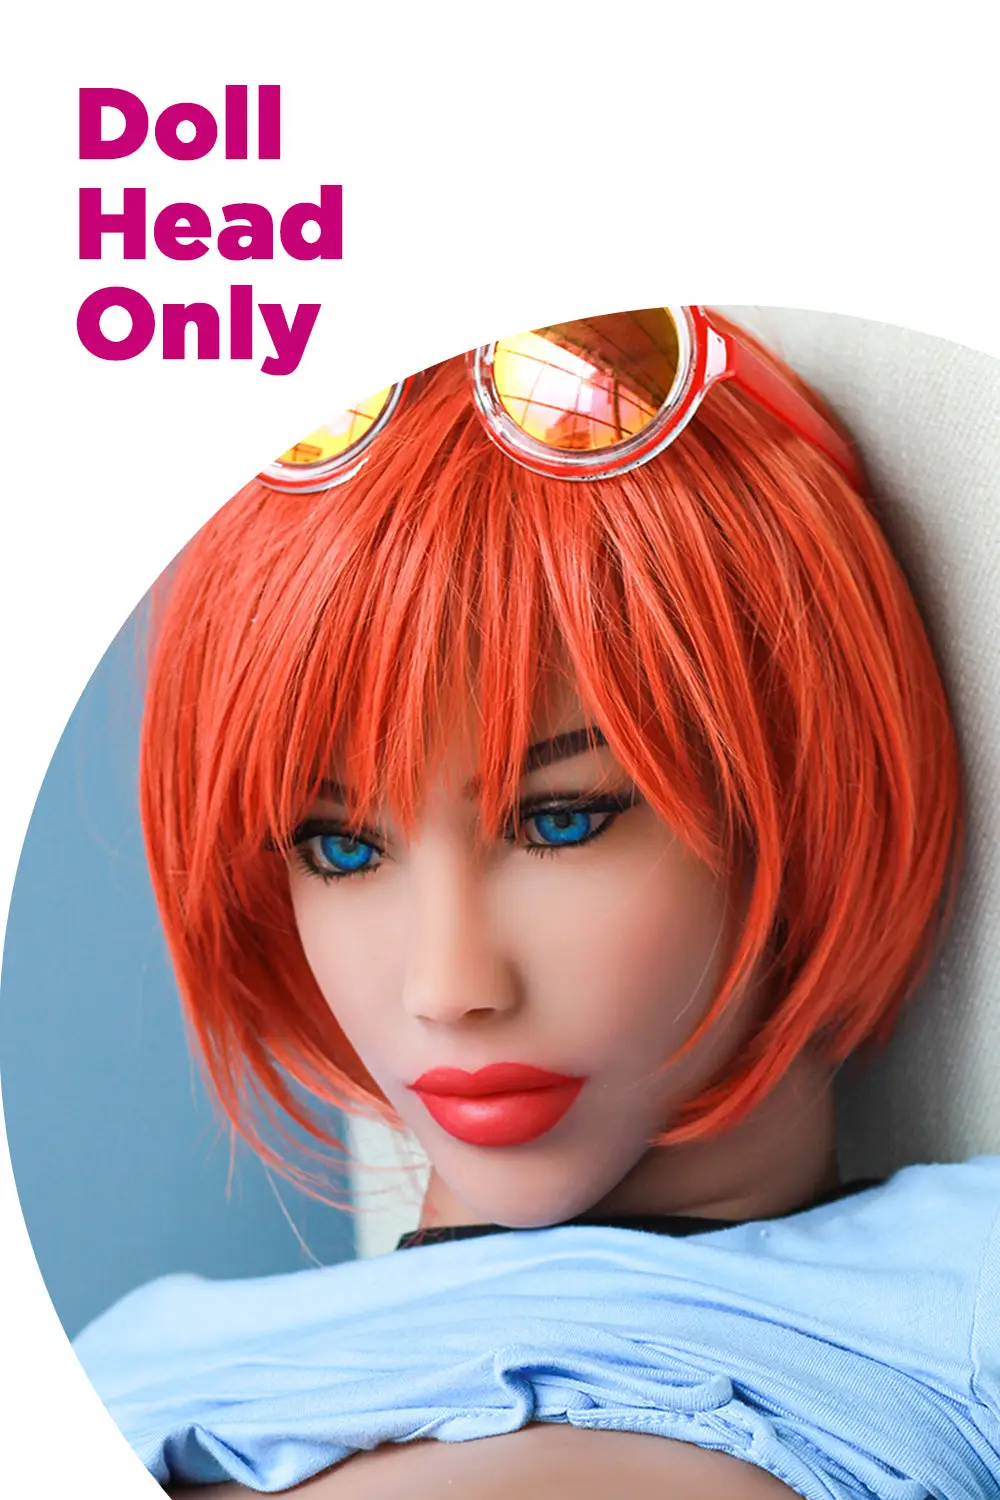 Us Stock Ridmii Clementine 138 Tpe Sex Doll Head Only